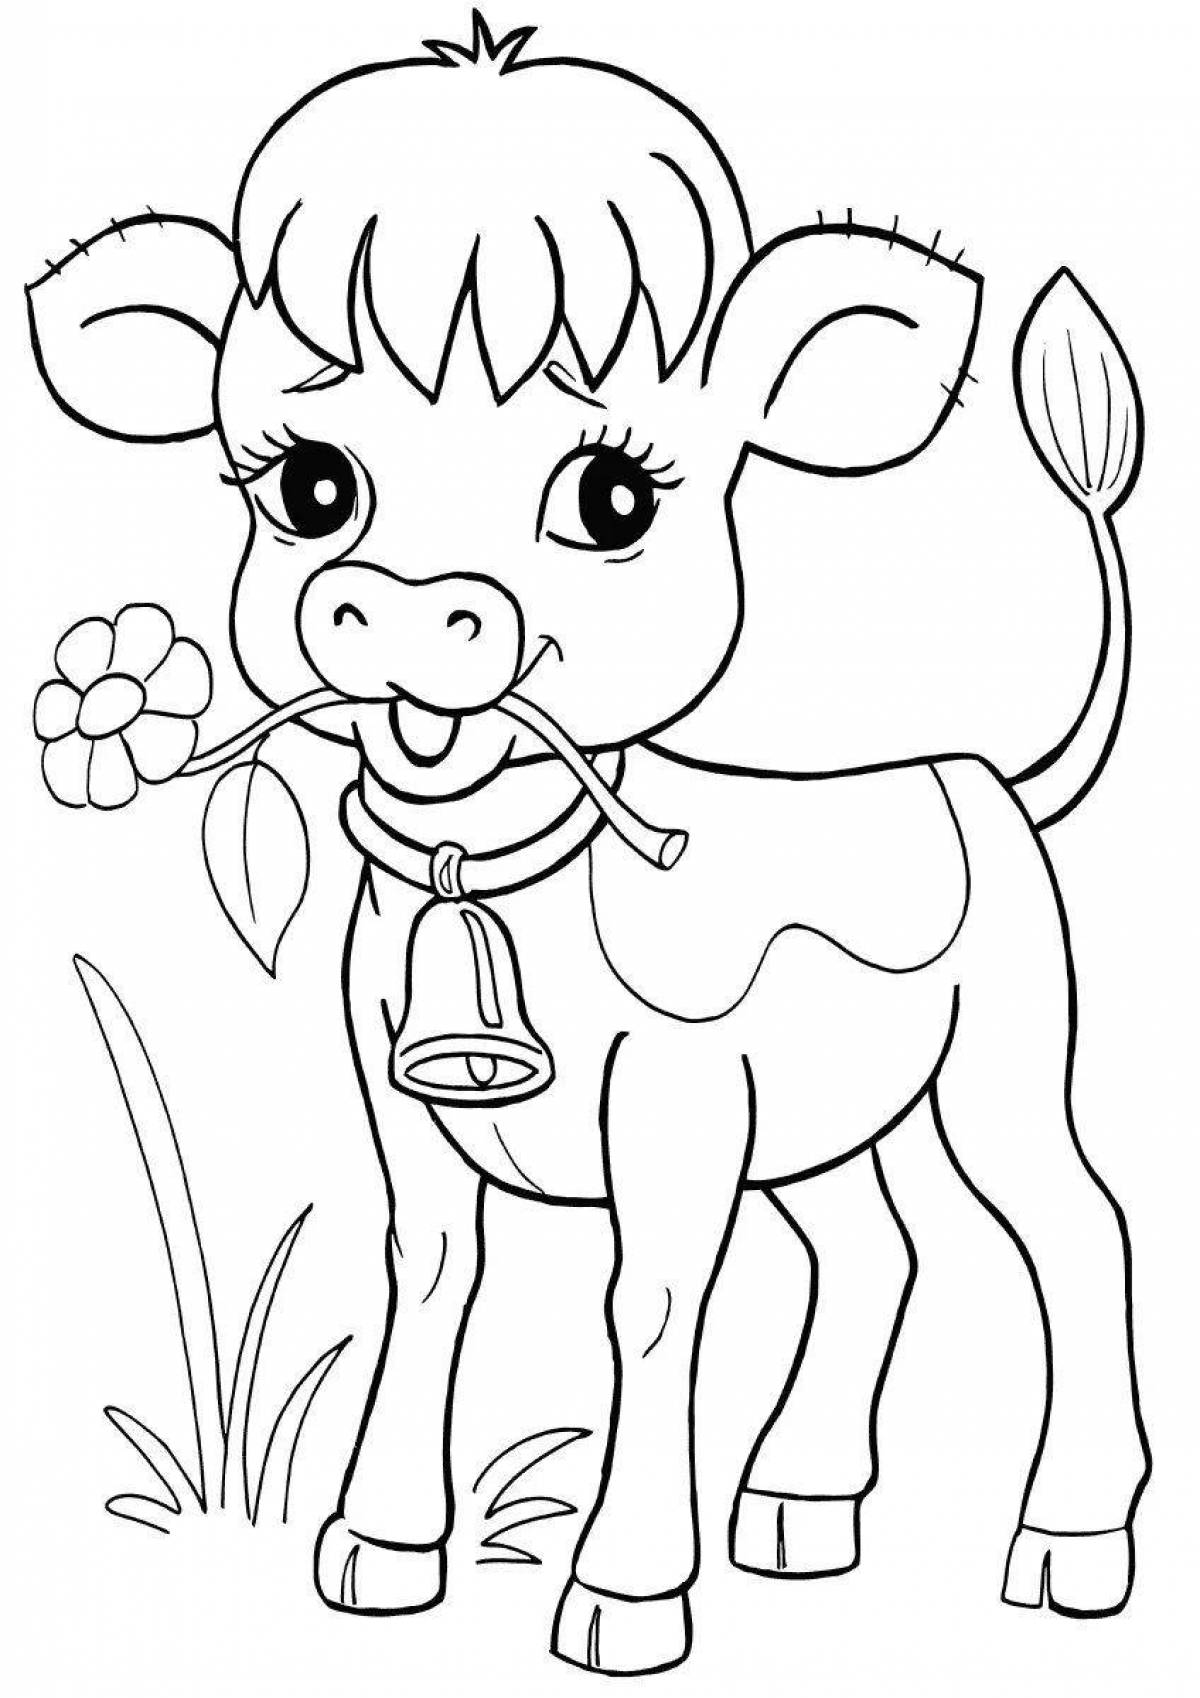 Charming symbol of the year coloring book